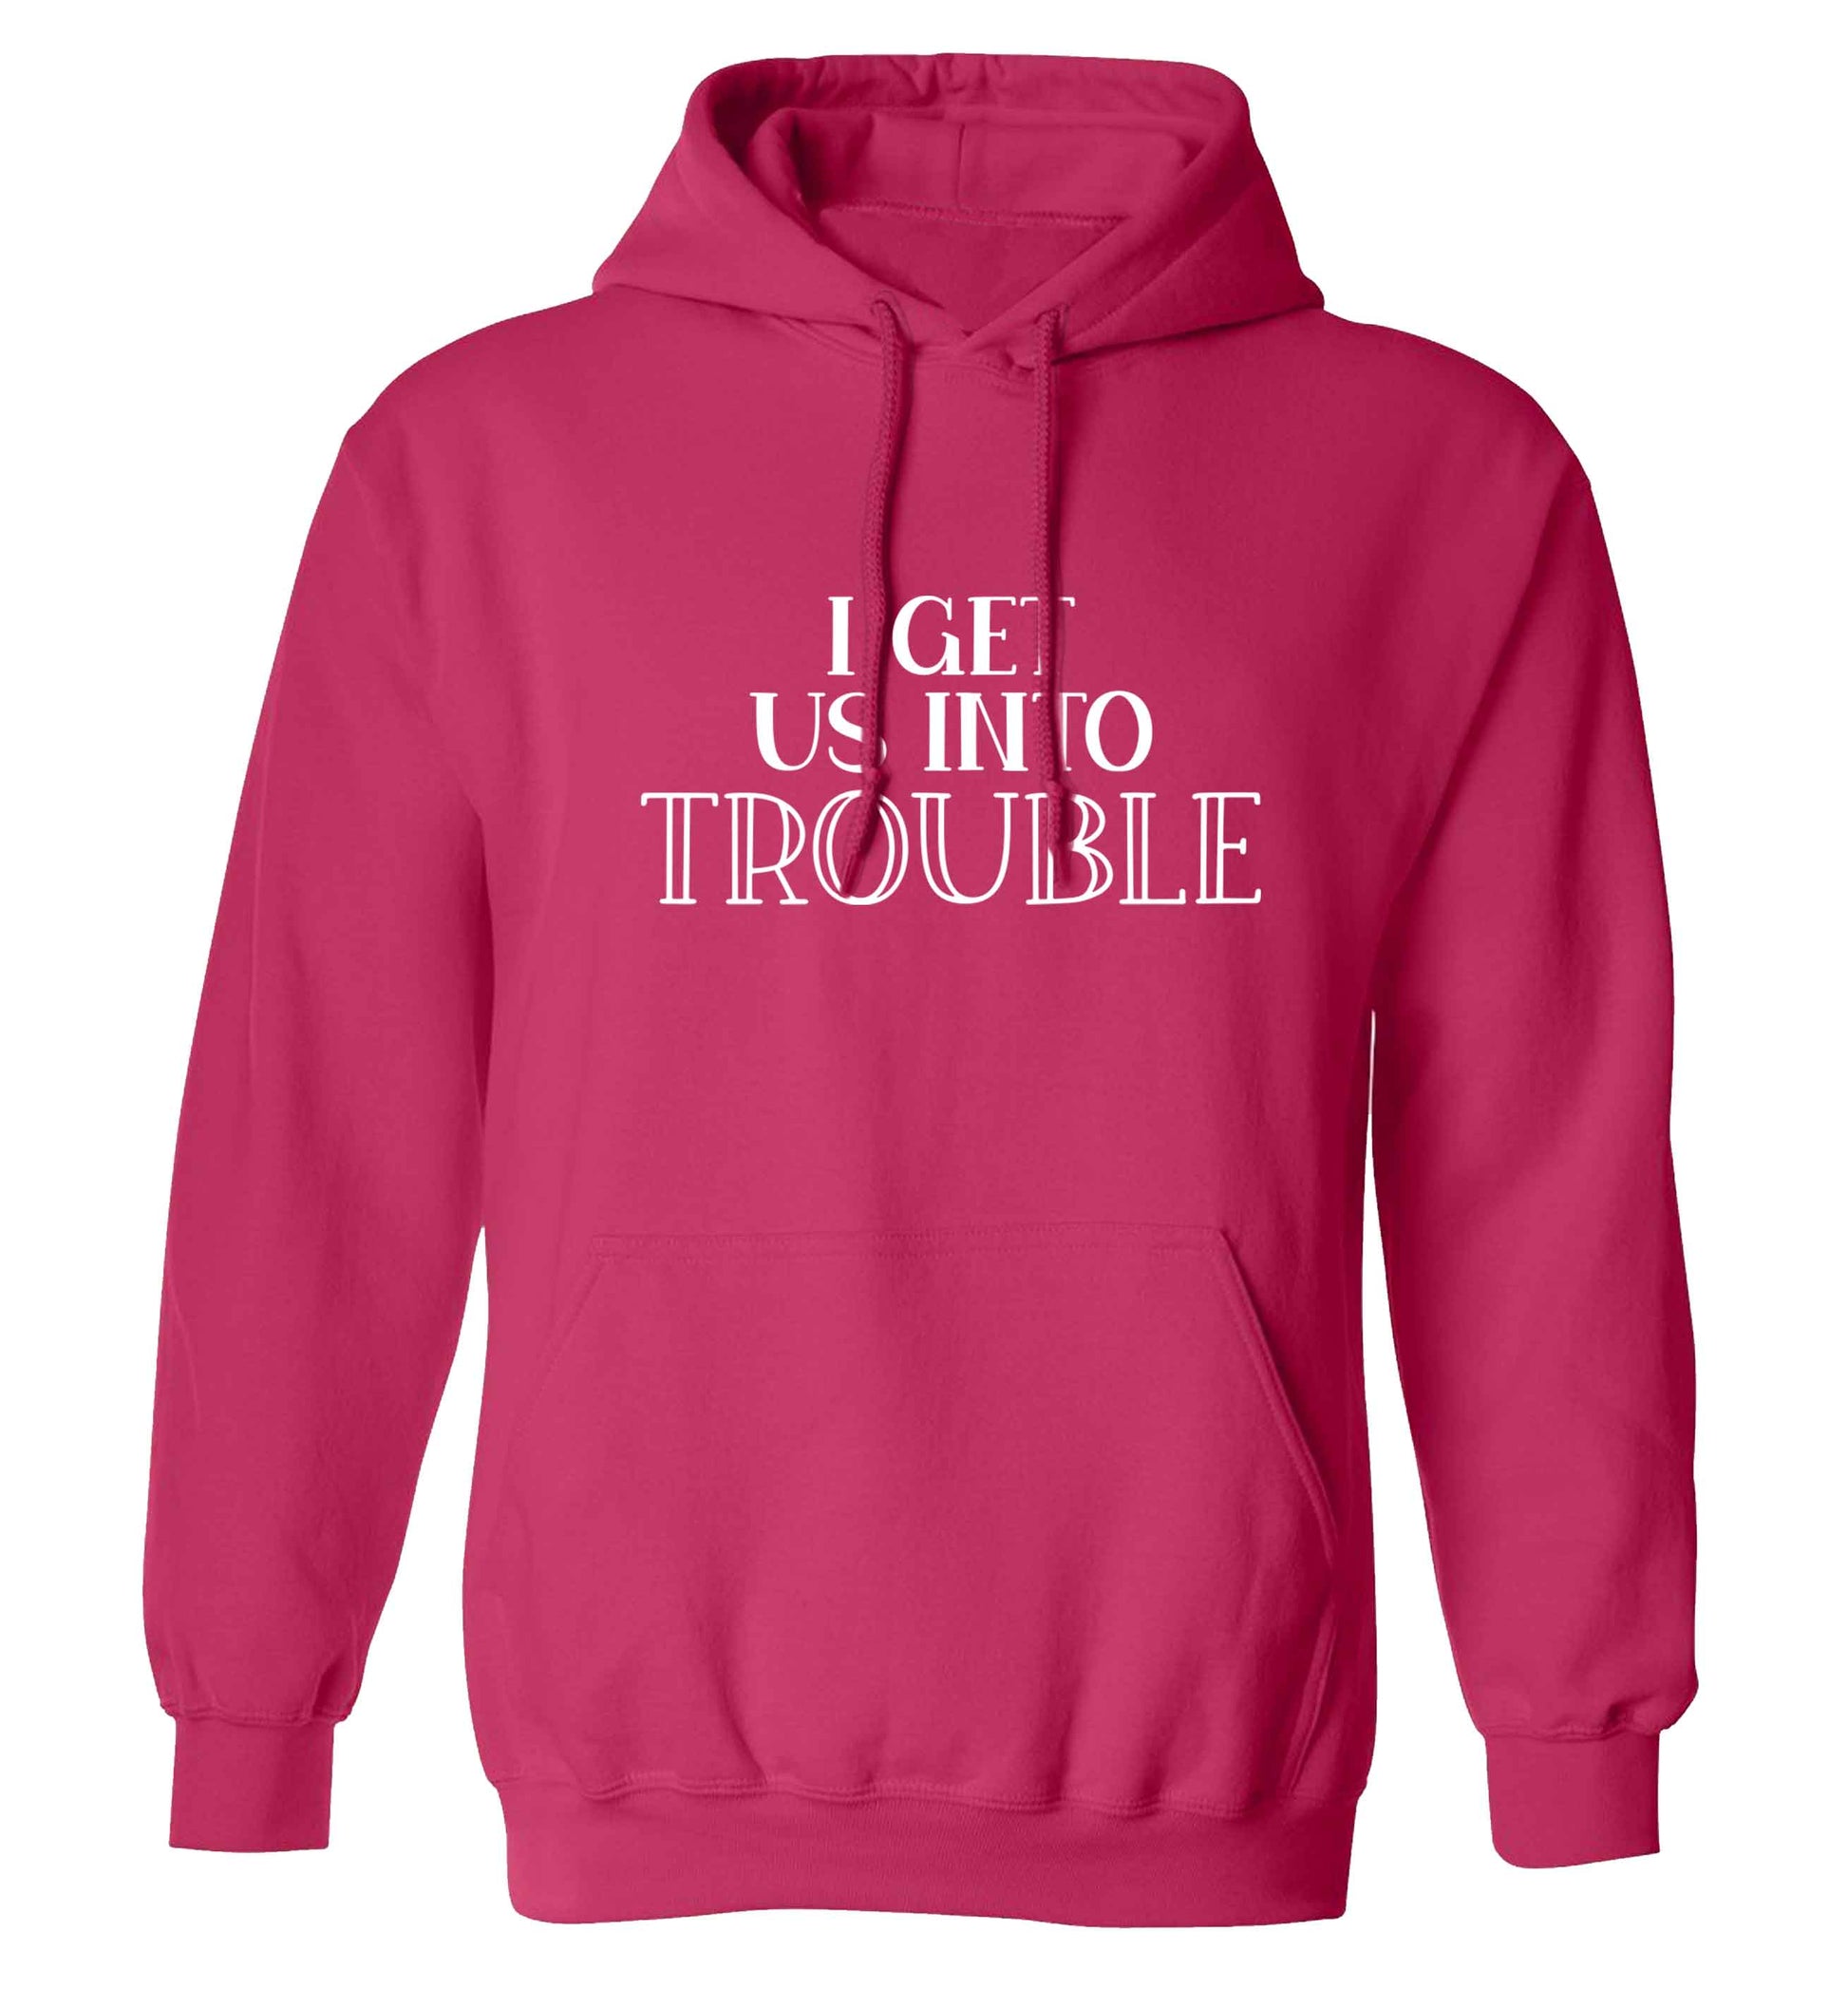 I get us into trouble adults unisex pink hoodie 2XL